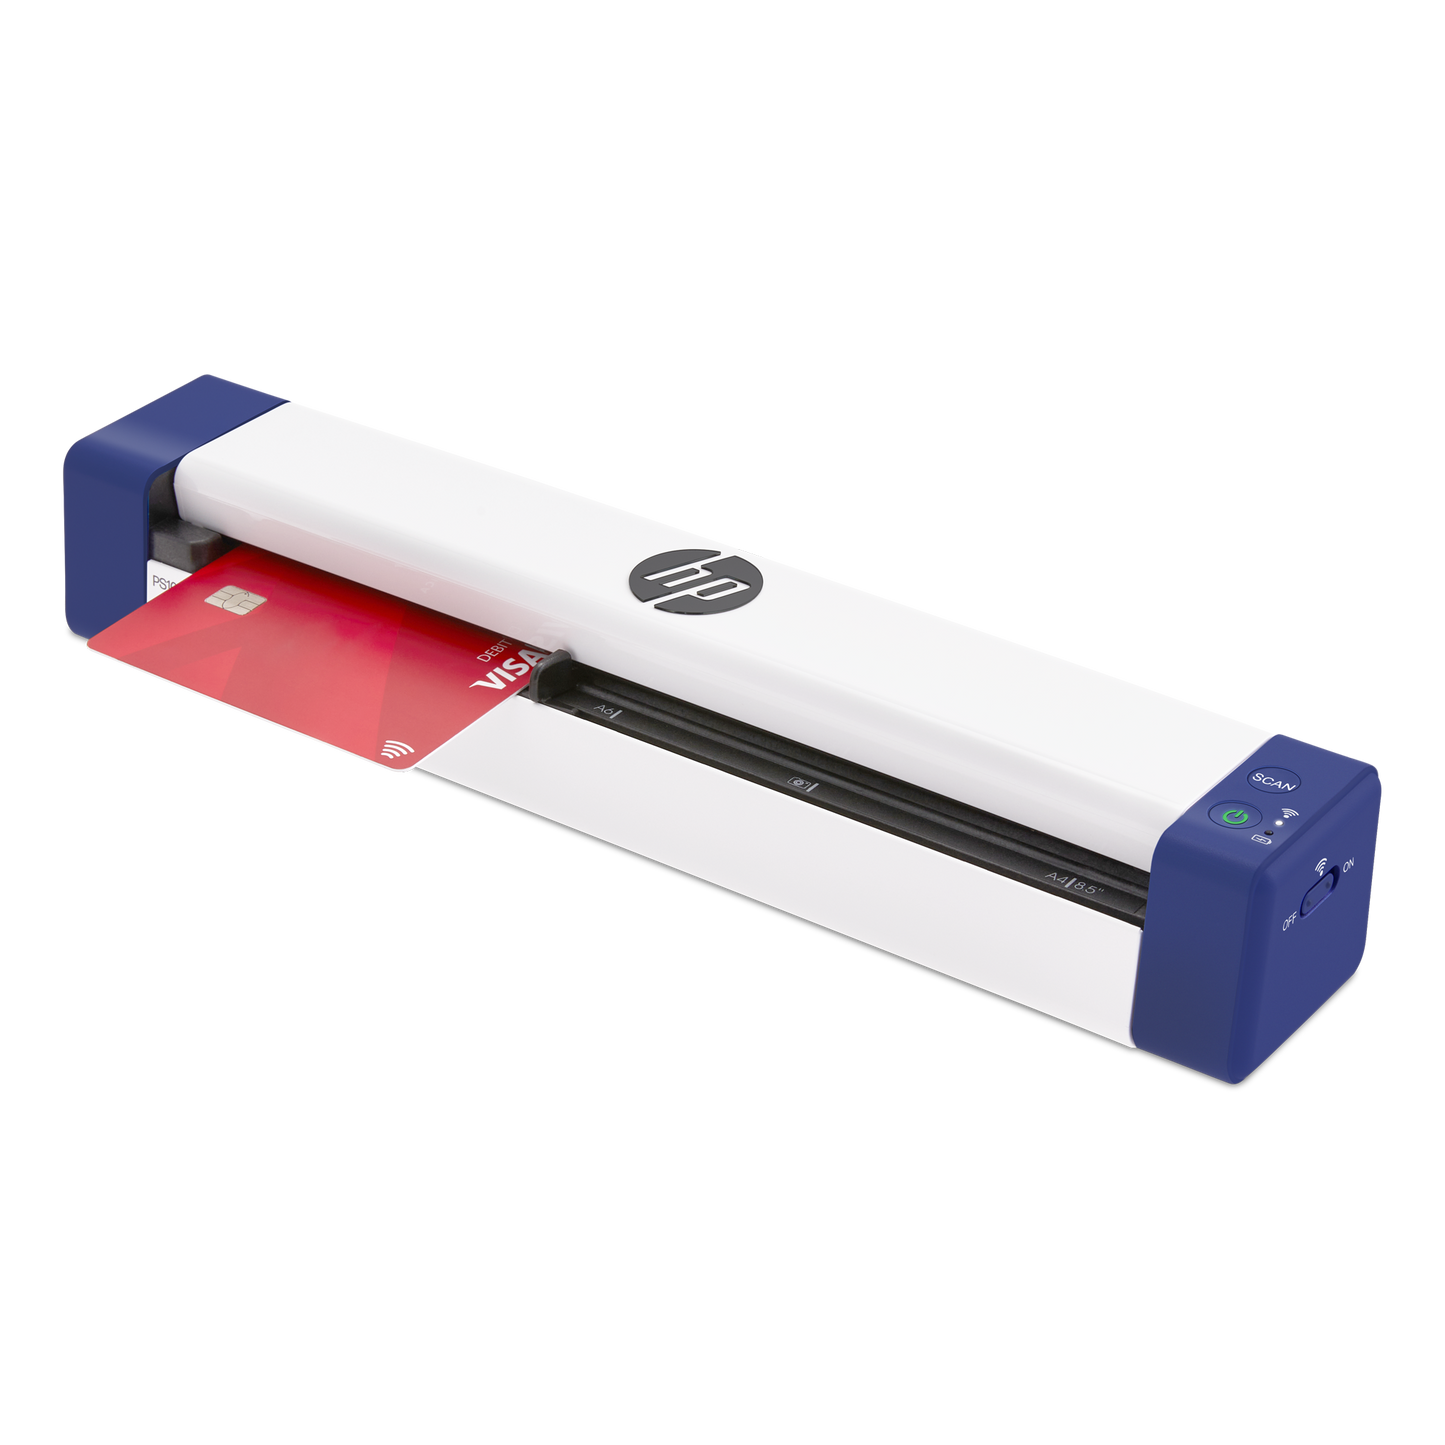 HP Wireless Portable Document Scanner for Single-Sided Scanning